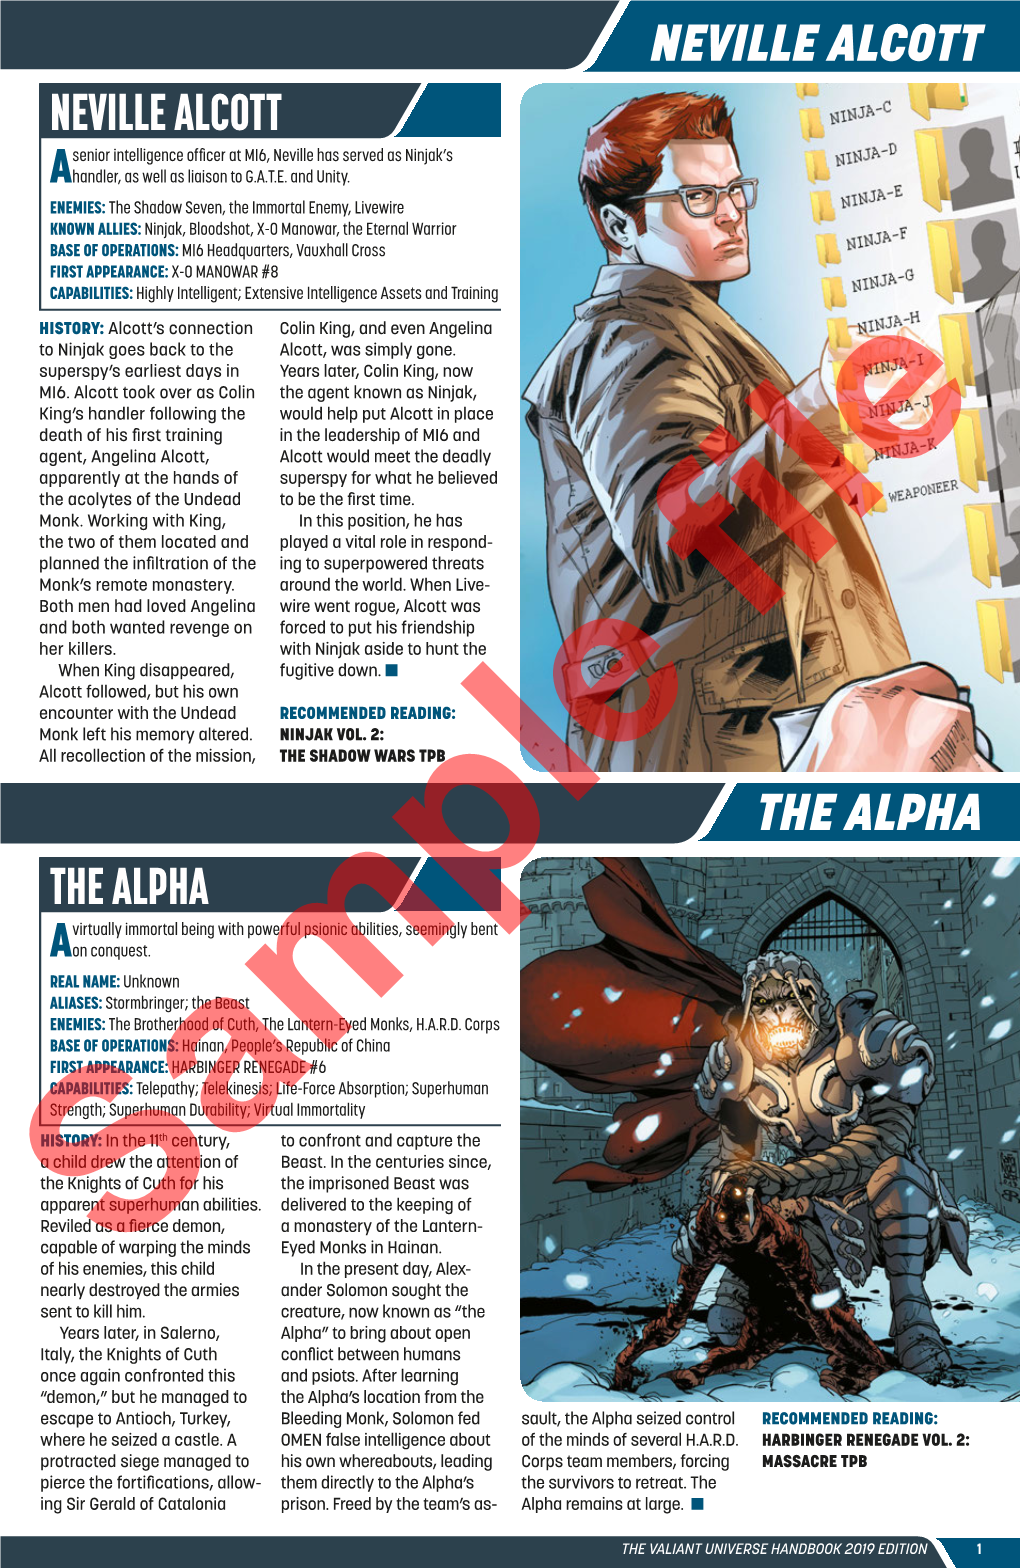 THE ALPHA the ALPHA Virtually Immortal Being with Powerful Psionic Abilities, Seemingly Bent a on Conquest